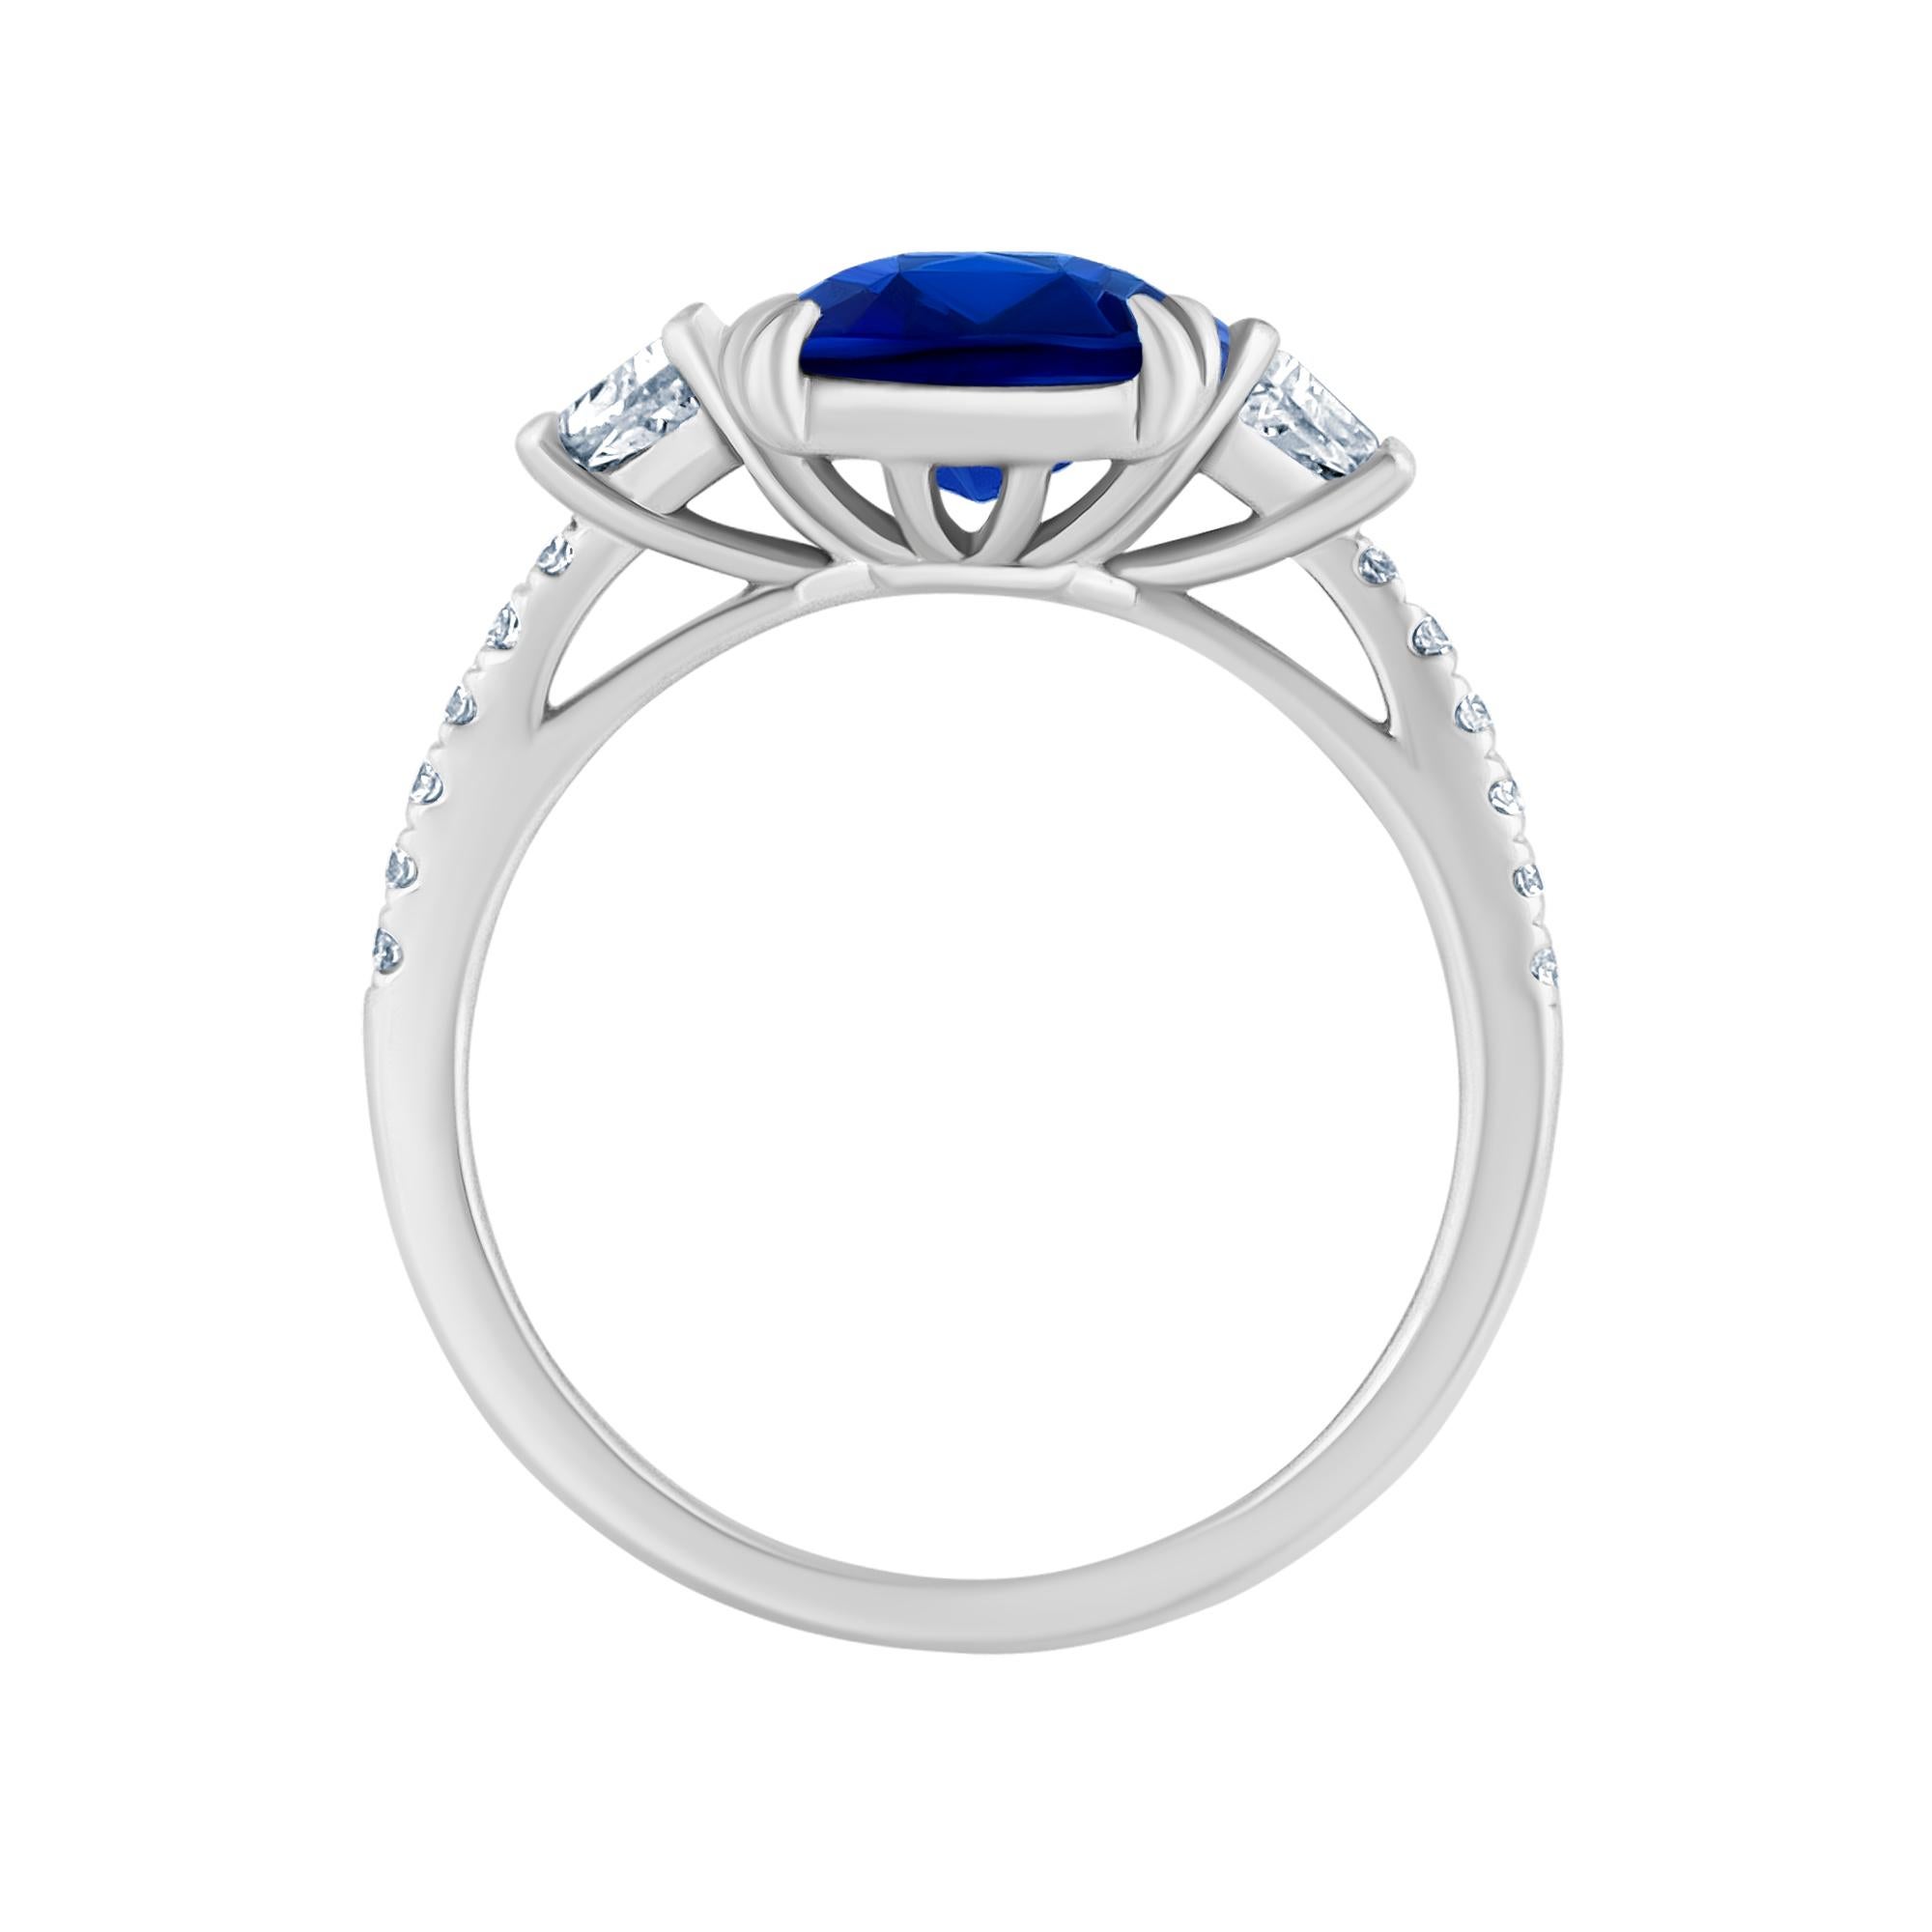 Emilio Jewelry 4.24 Carat Vivid Blue Sapphire Diamond Ring 
This amazing ring is unique and well thought out before Emilio designed it! Most women today want a ring that is striking, yet humble enough to wear to perform everyday errands. This ring